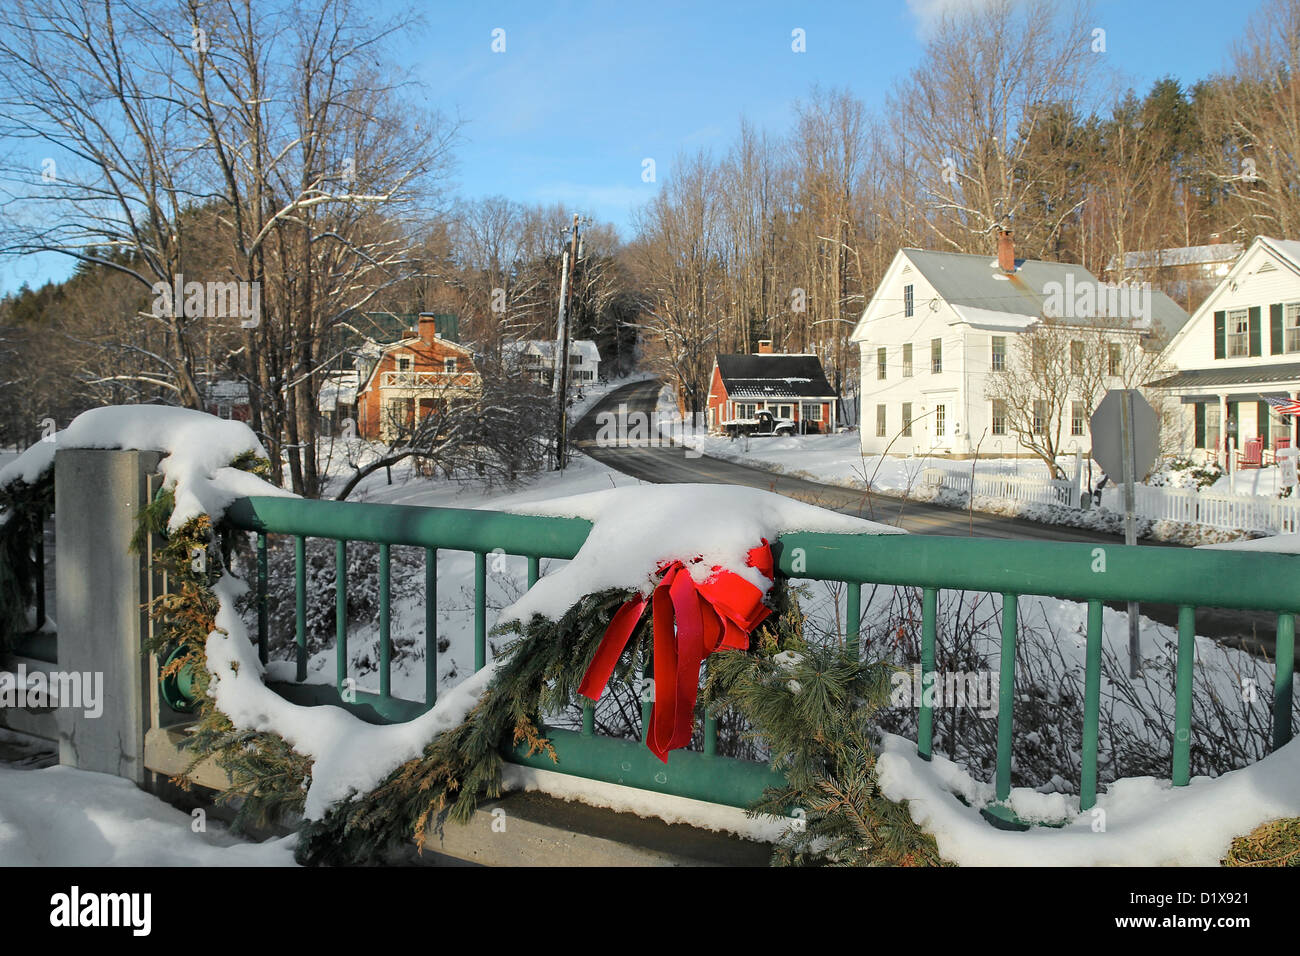 On a bridge in wintertime, looking towards homes in the small Vermont town of Grafton Stock Photo